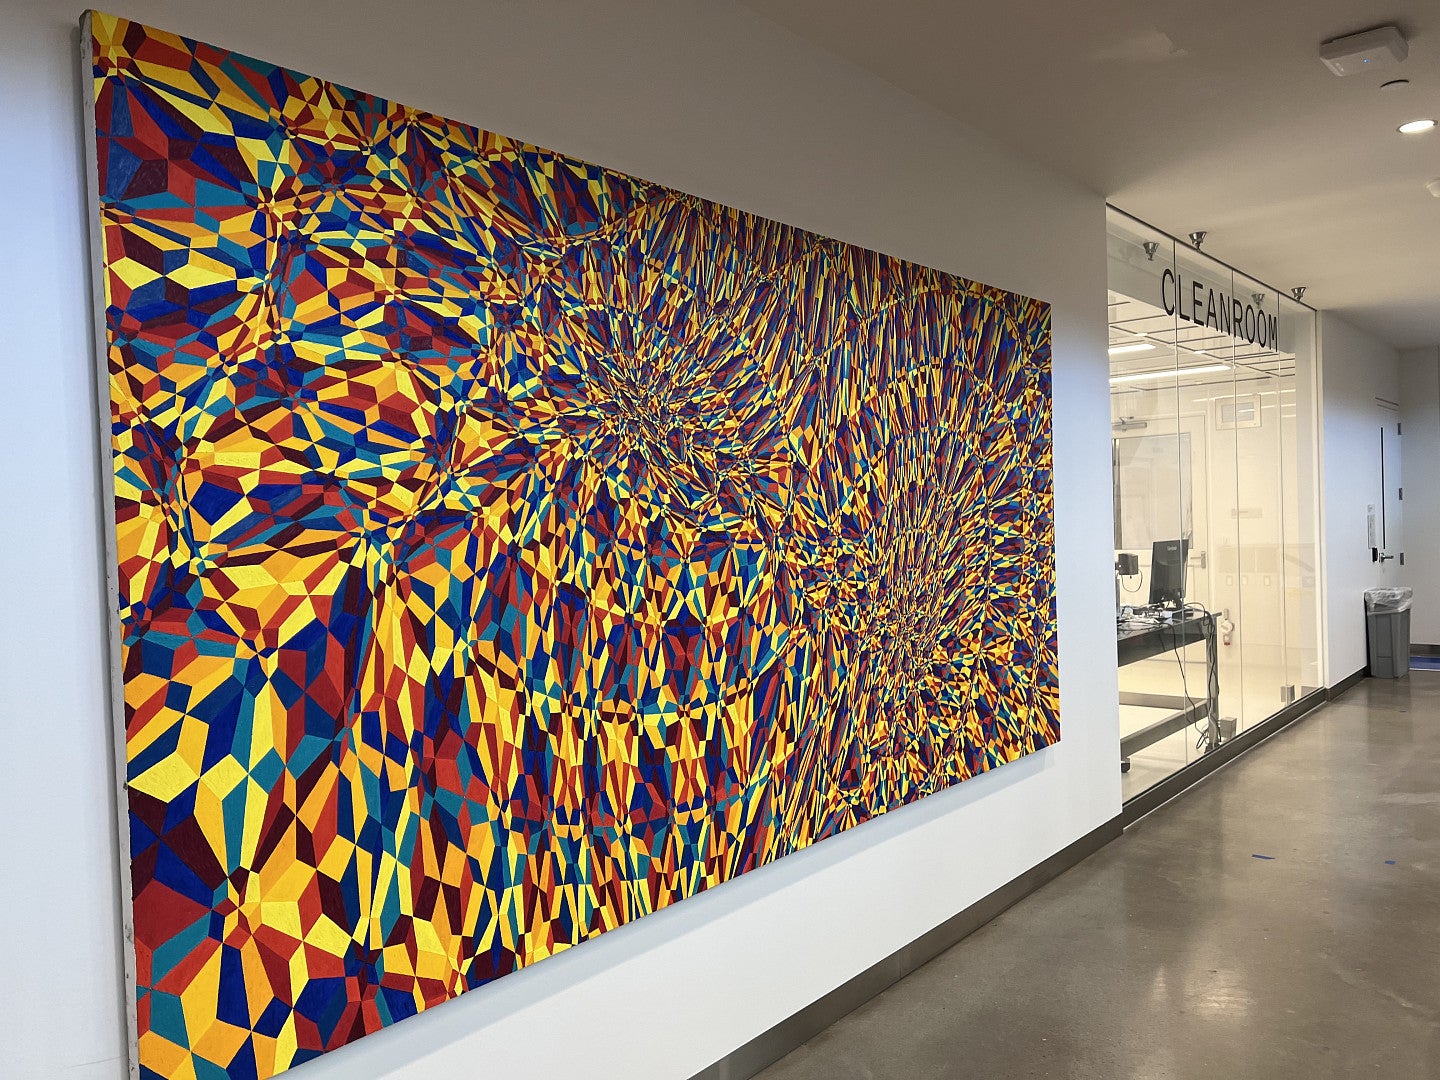 A very large modern painting covering nearly a whole wall that has lots of intricate shapes filled with different colors